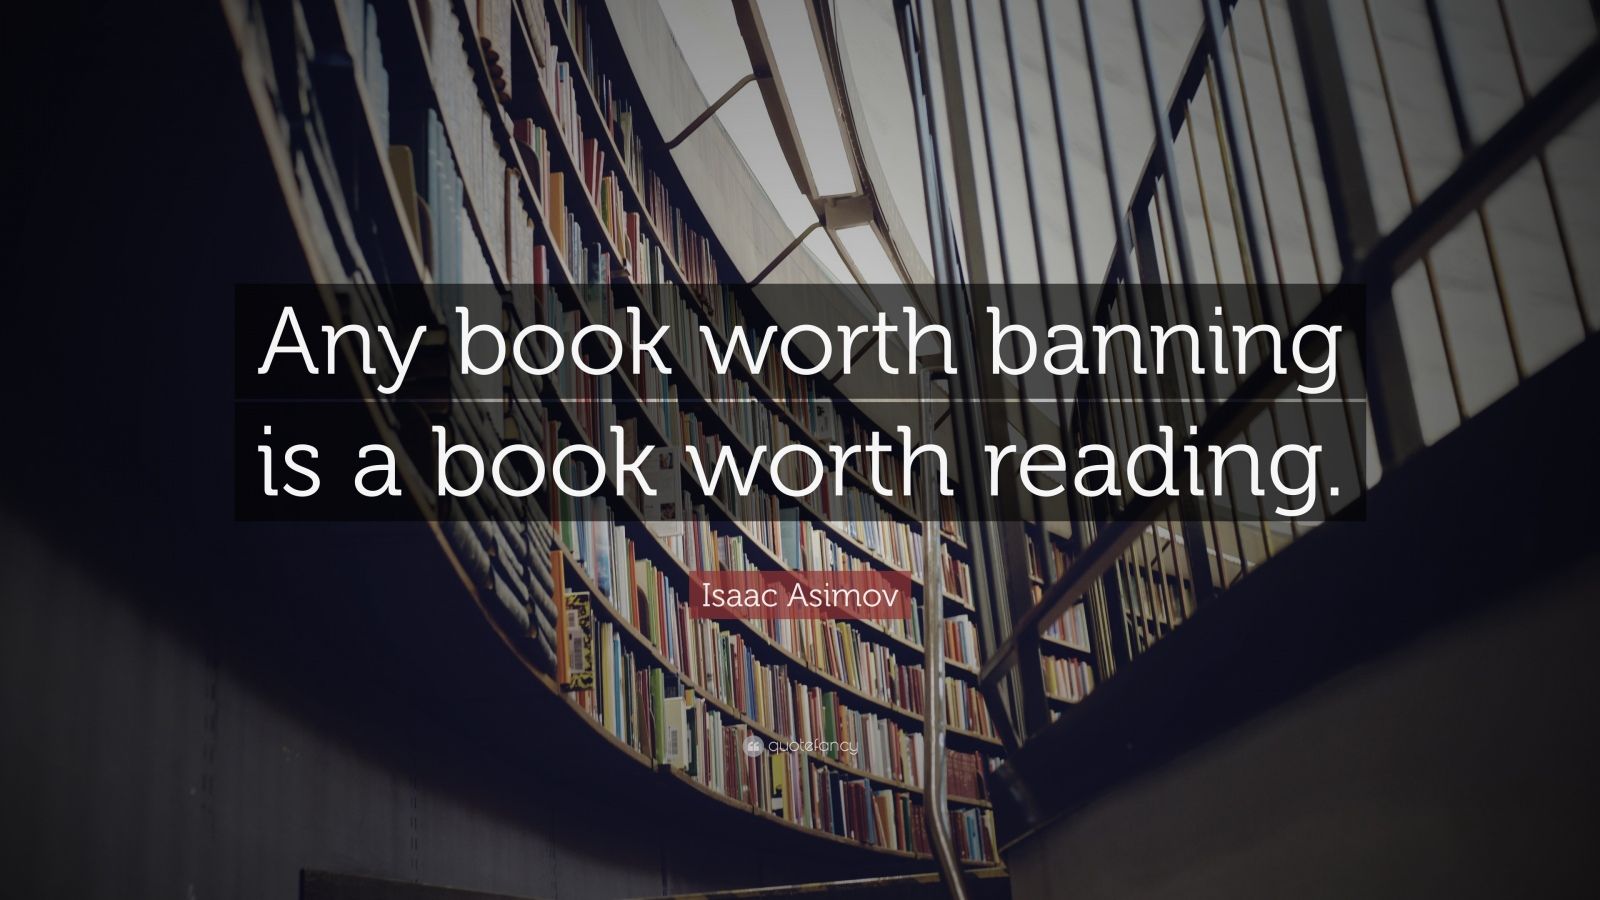 Isaac Asimov Quote: “Any book worth banning is a book worth reading